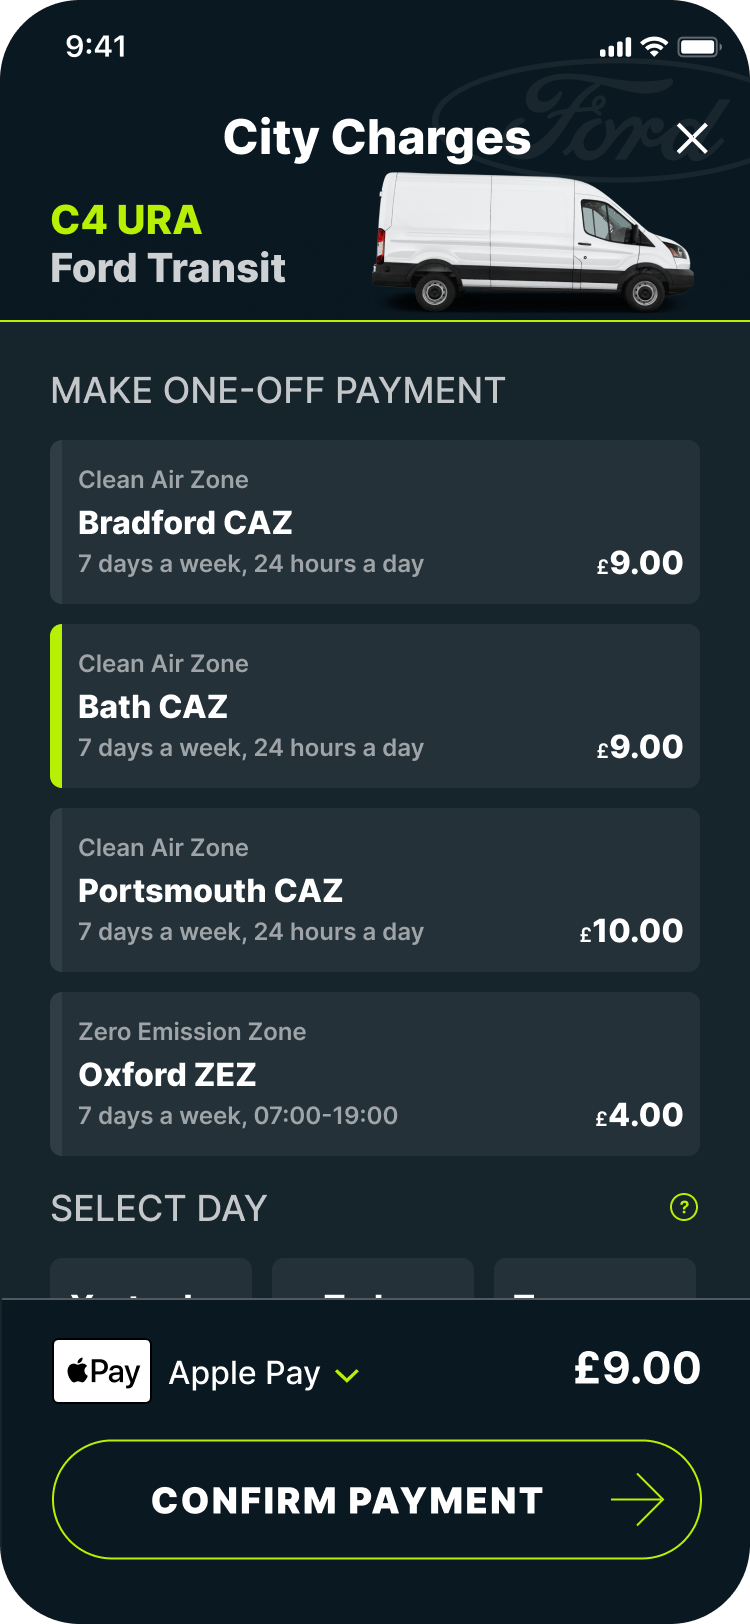 Pay for all commercial zones including Bath, Portsmouth and Bradford in the Caura app